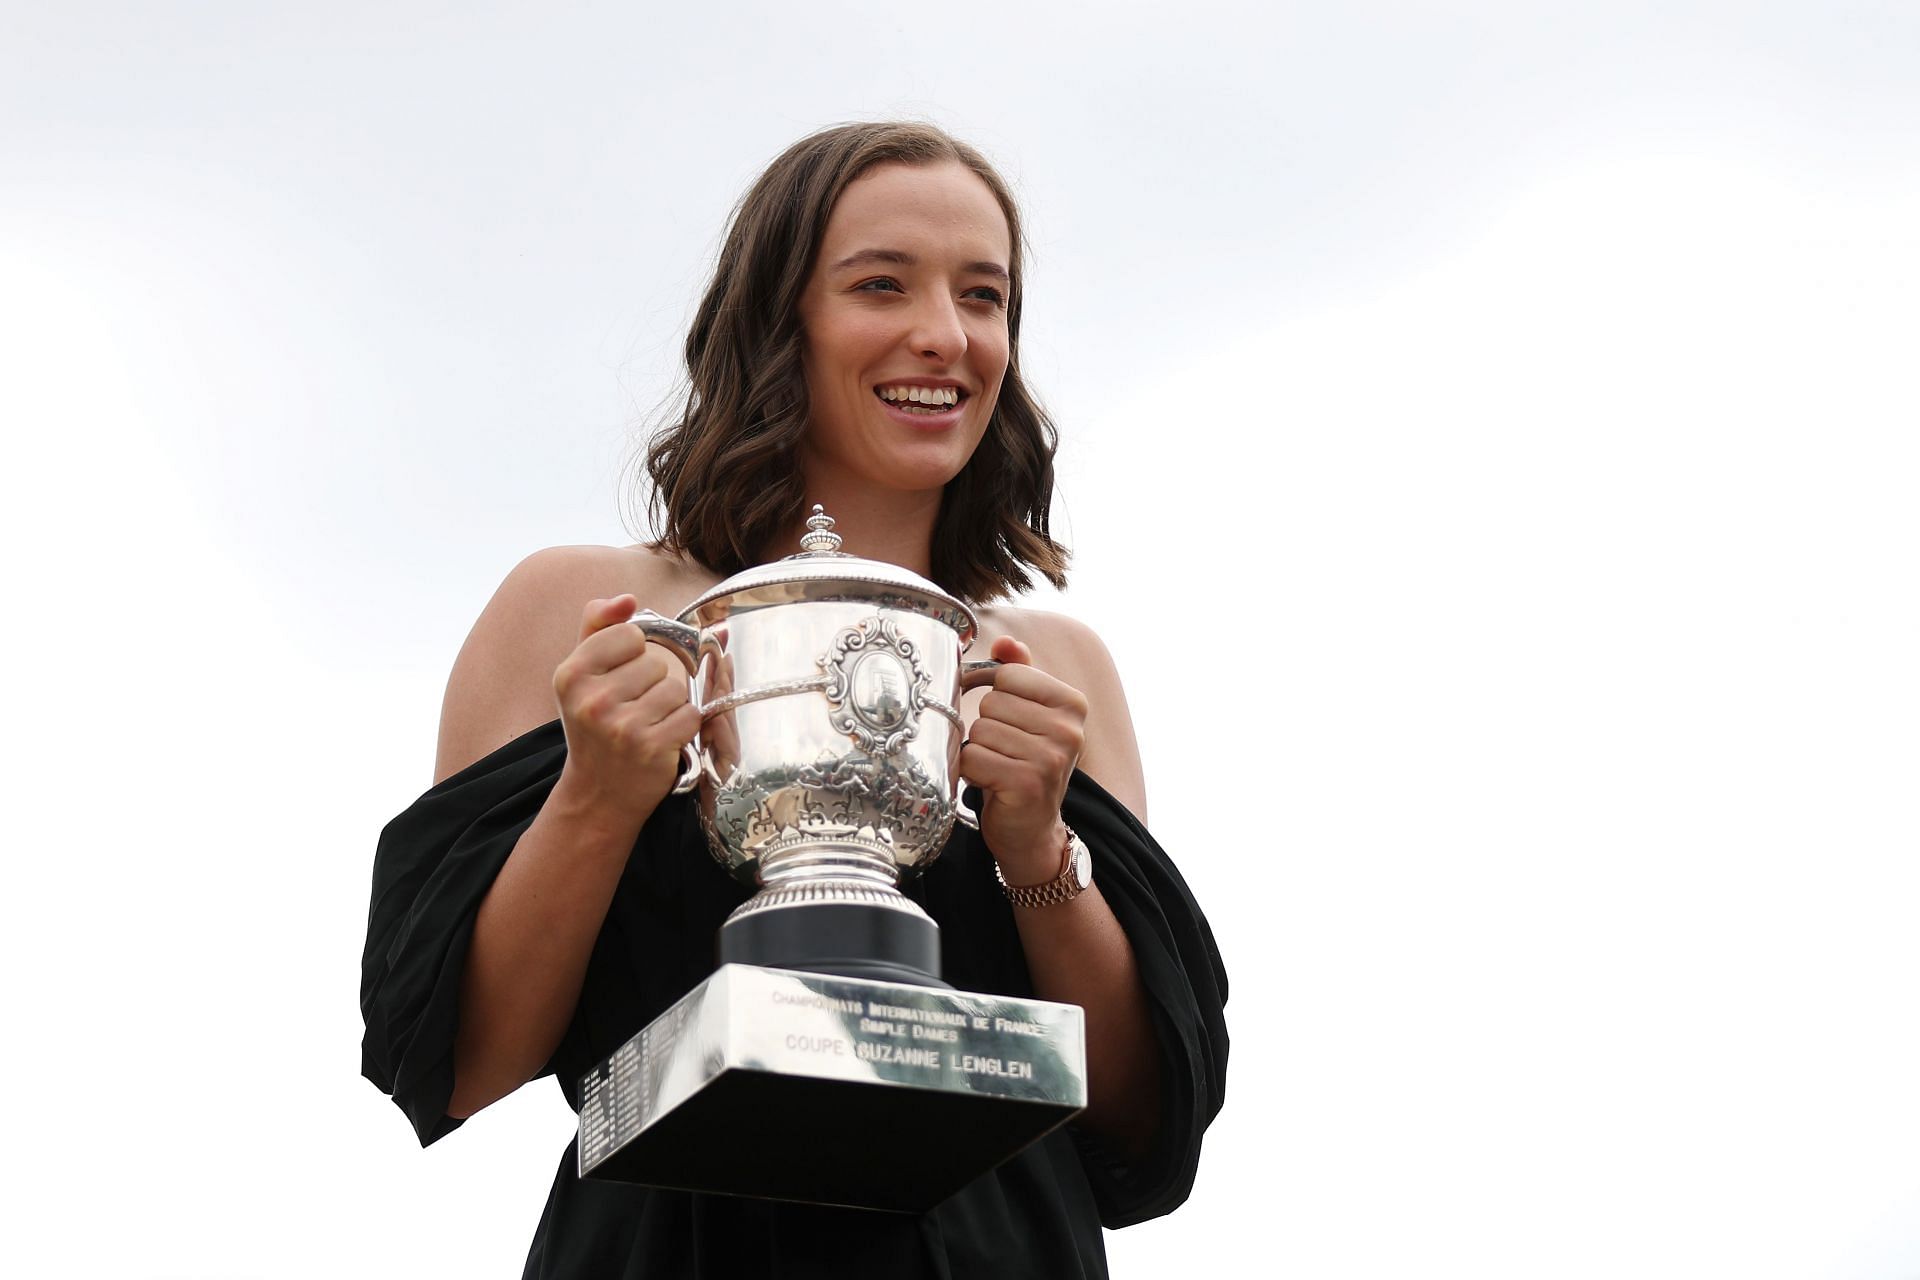 Iga Swiatek pictured with her French Open trophy.